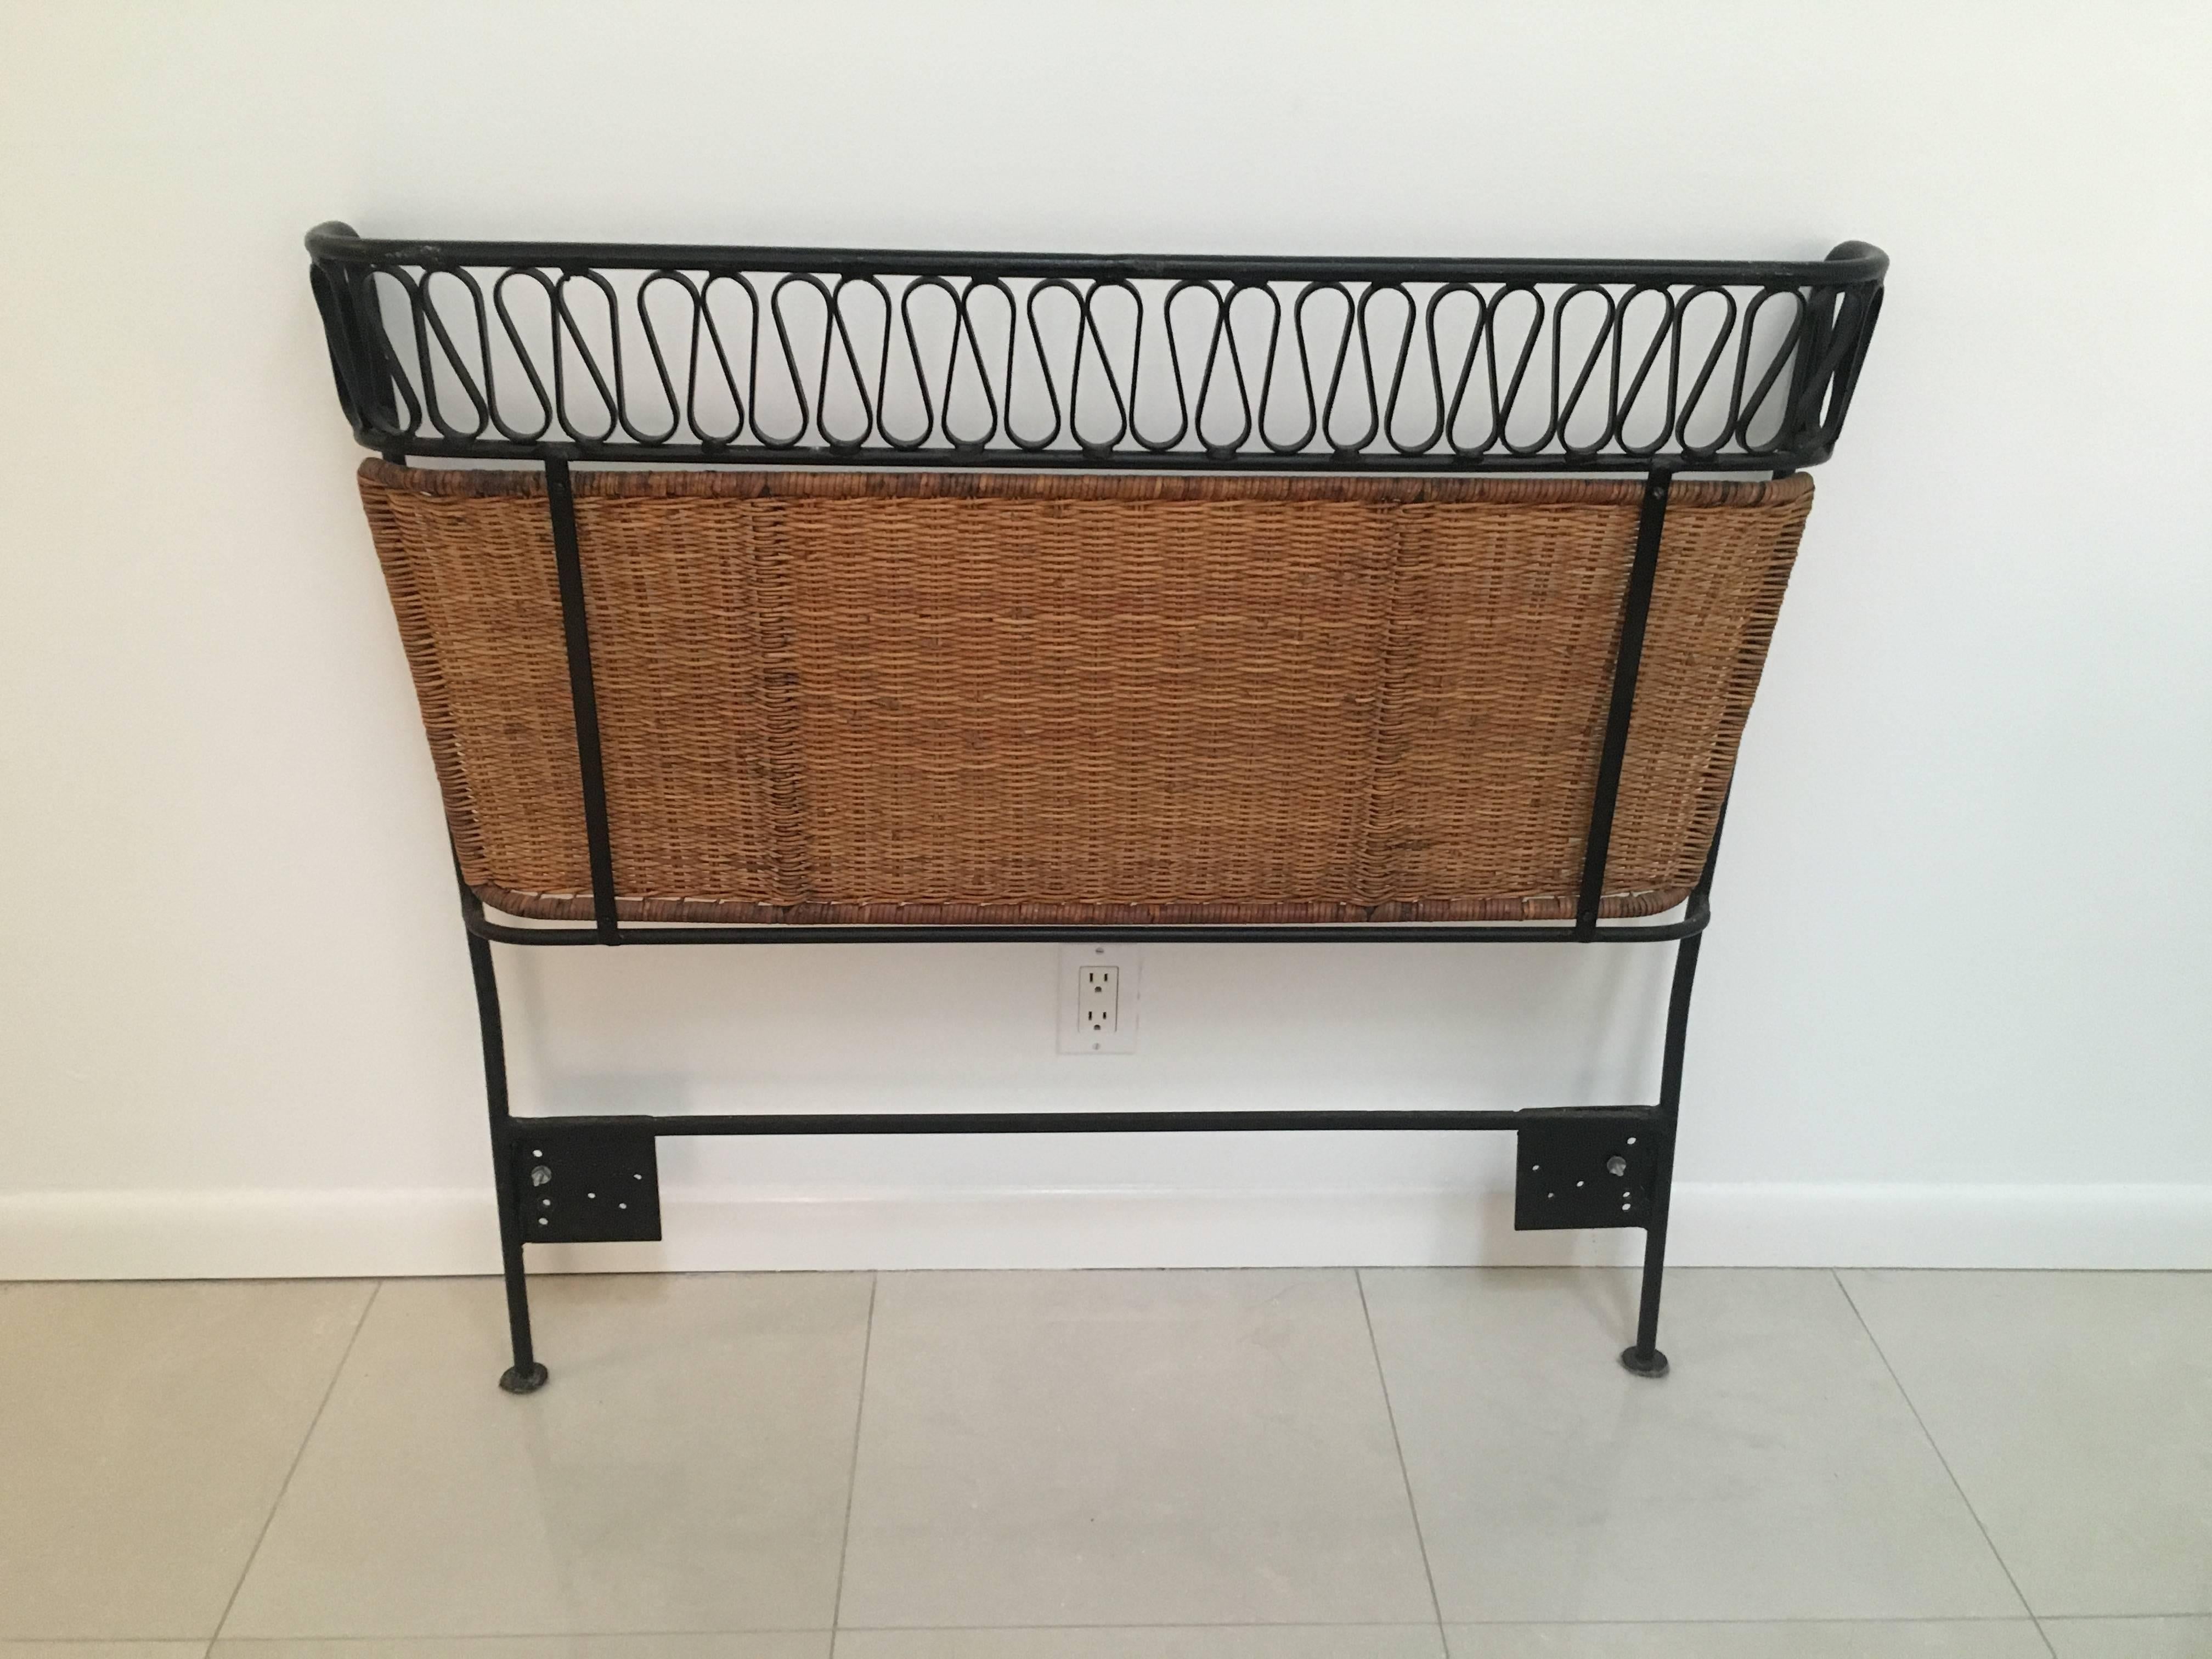 A very rare pair of twin headboards from the "Ribbon Series" of Salterini's modern line that was only produced for a few years in the 1950s.
The enameled wrought Iron tapers out and arches in at the top. Below the ribbon detail is